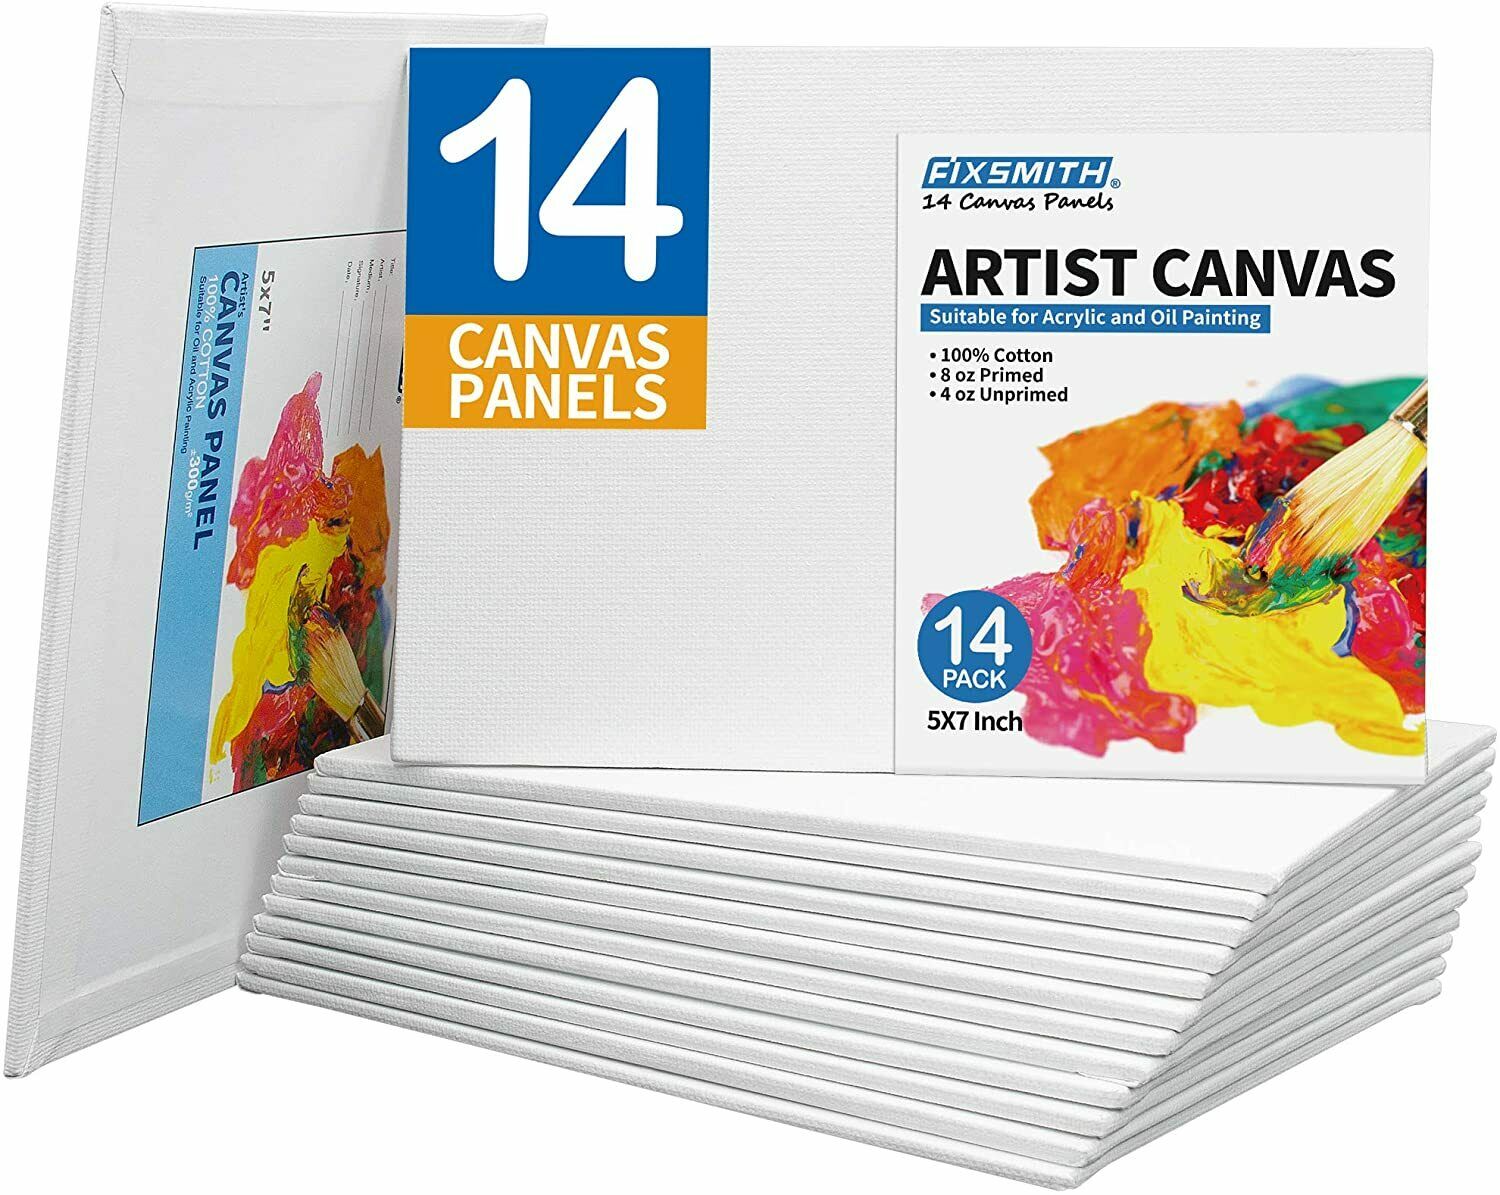 Fixsmith Canvas Panels 14 Pack-100% Cotton Primed Canvases，artist Canvas Board